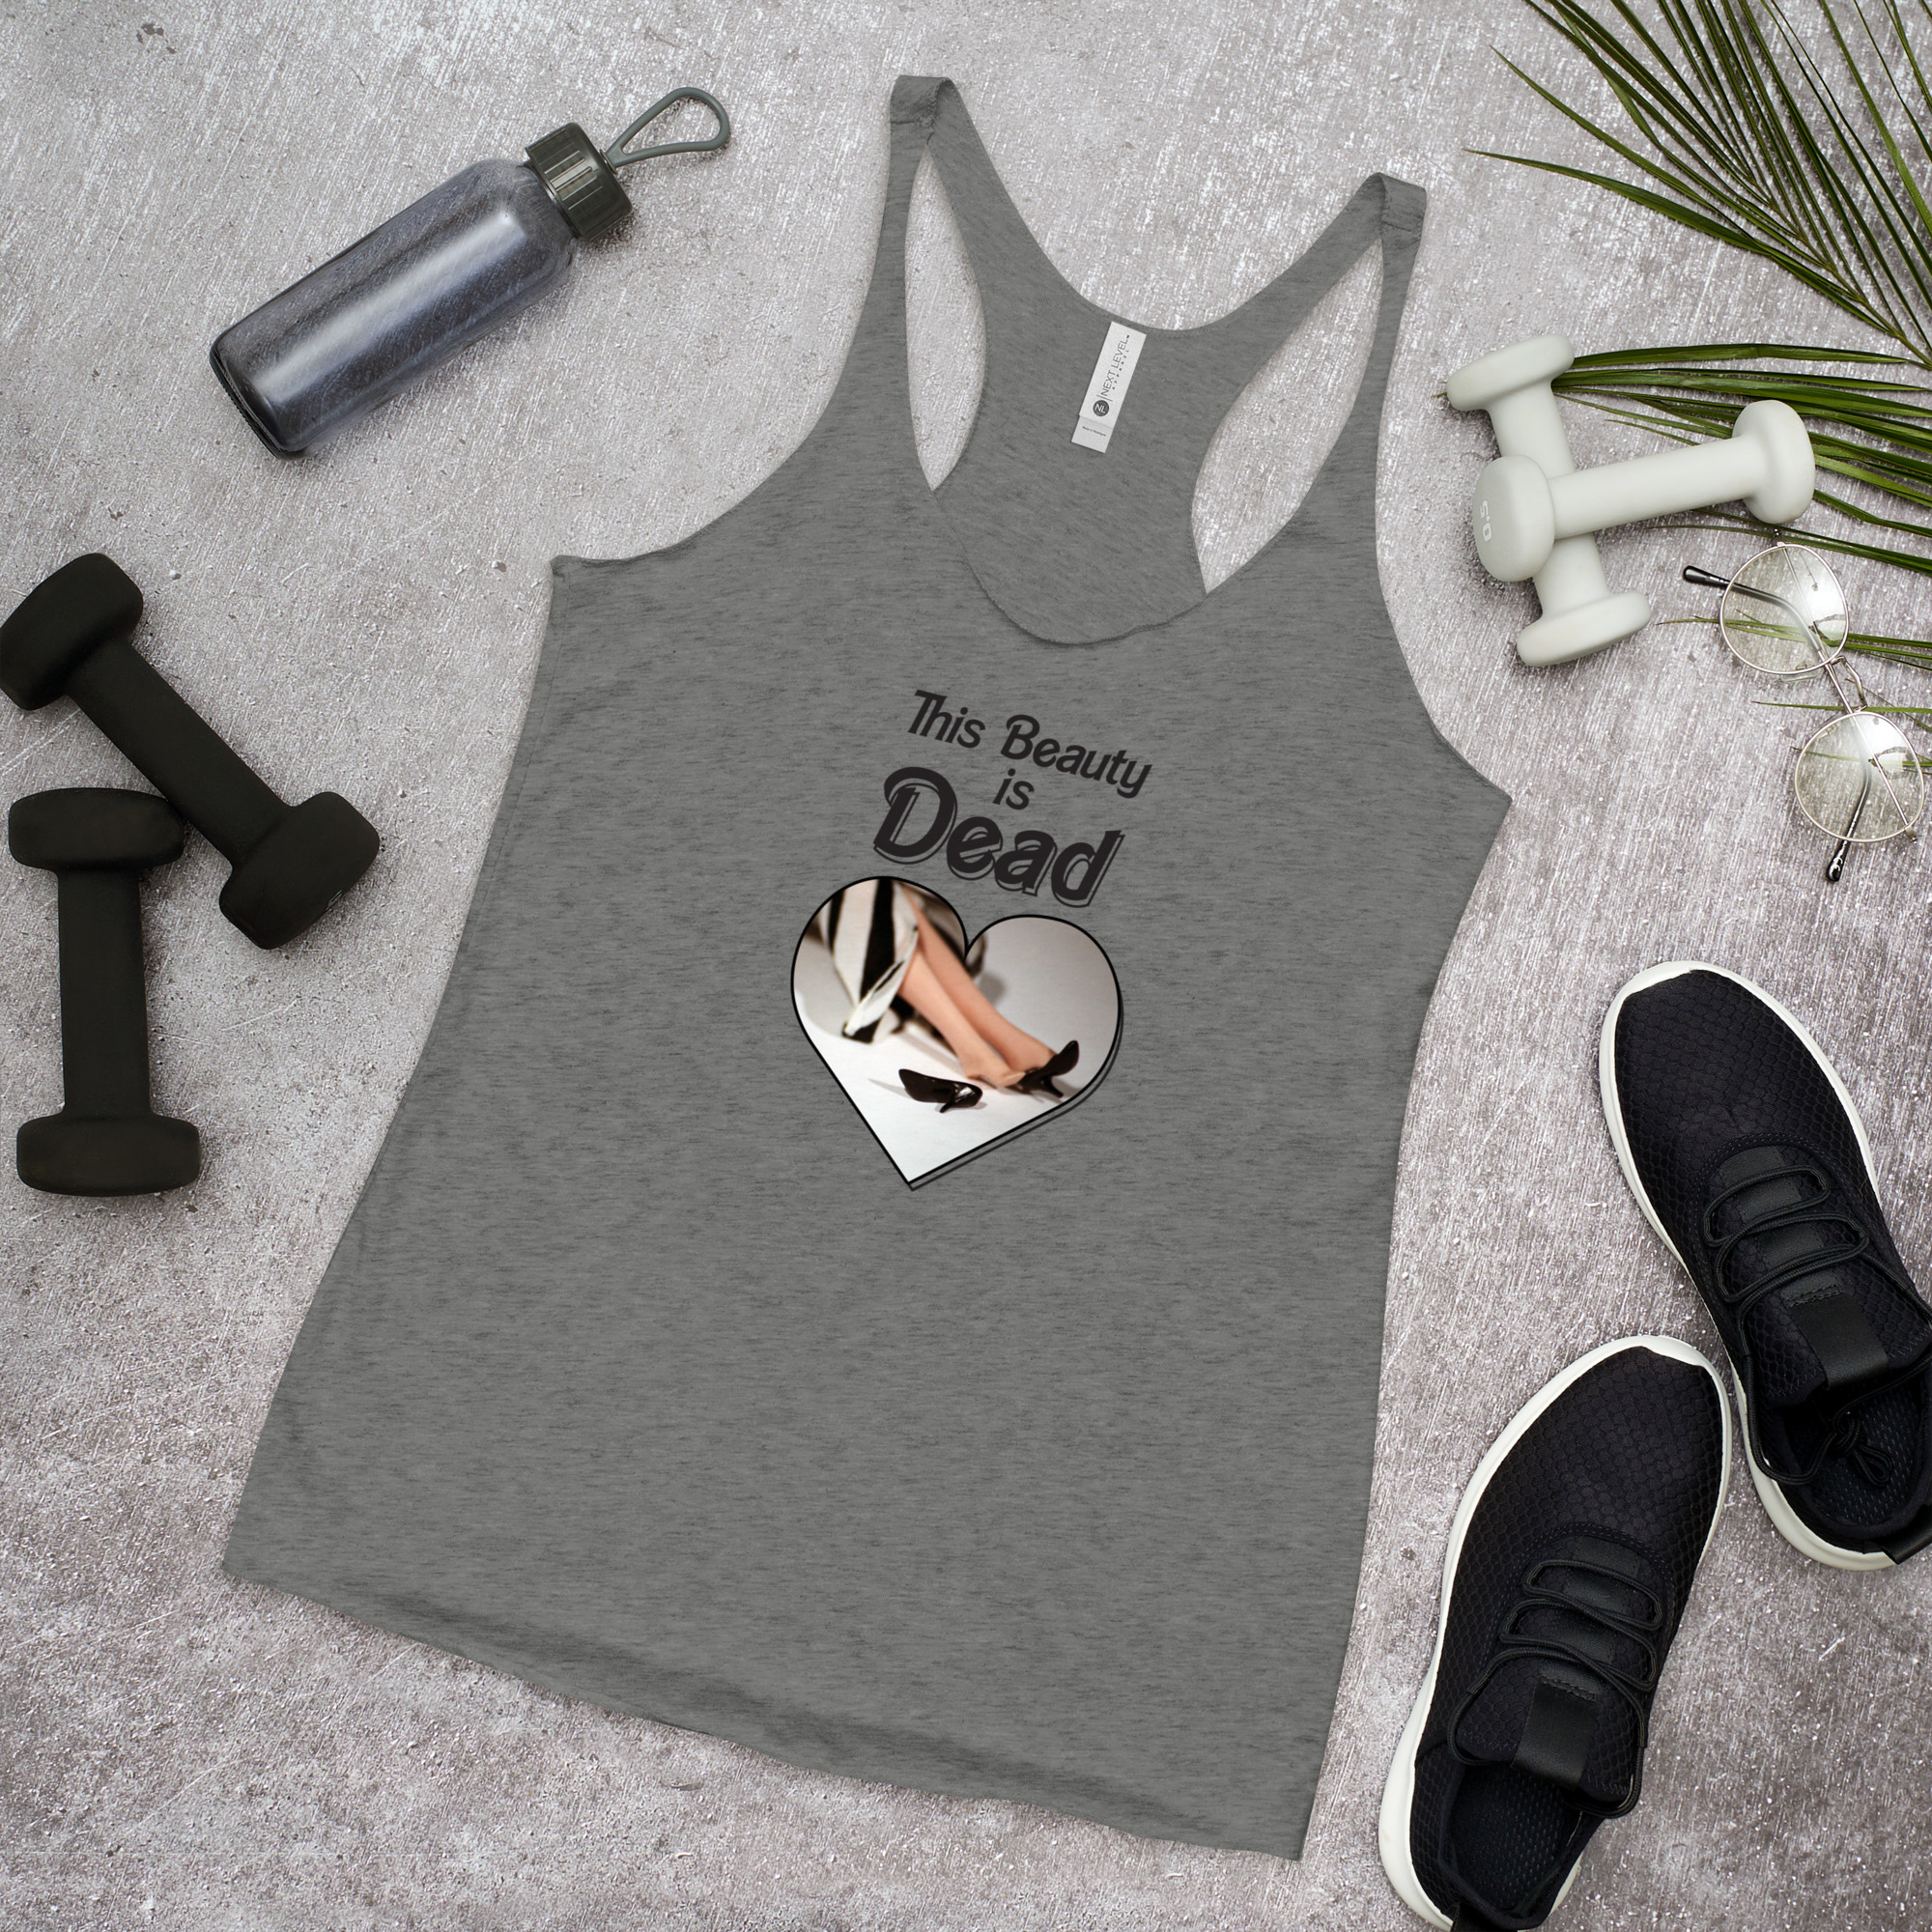 This Beauty is Dead tank top by Wilde Designs